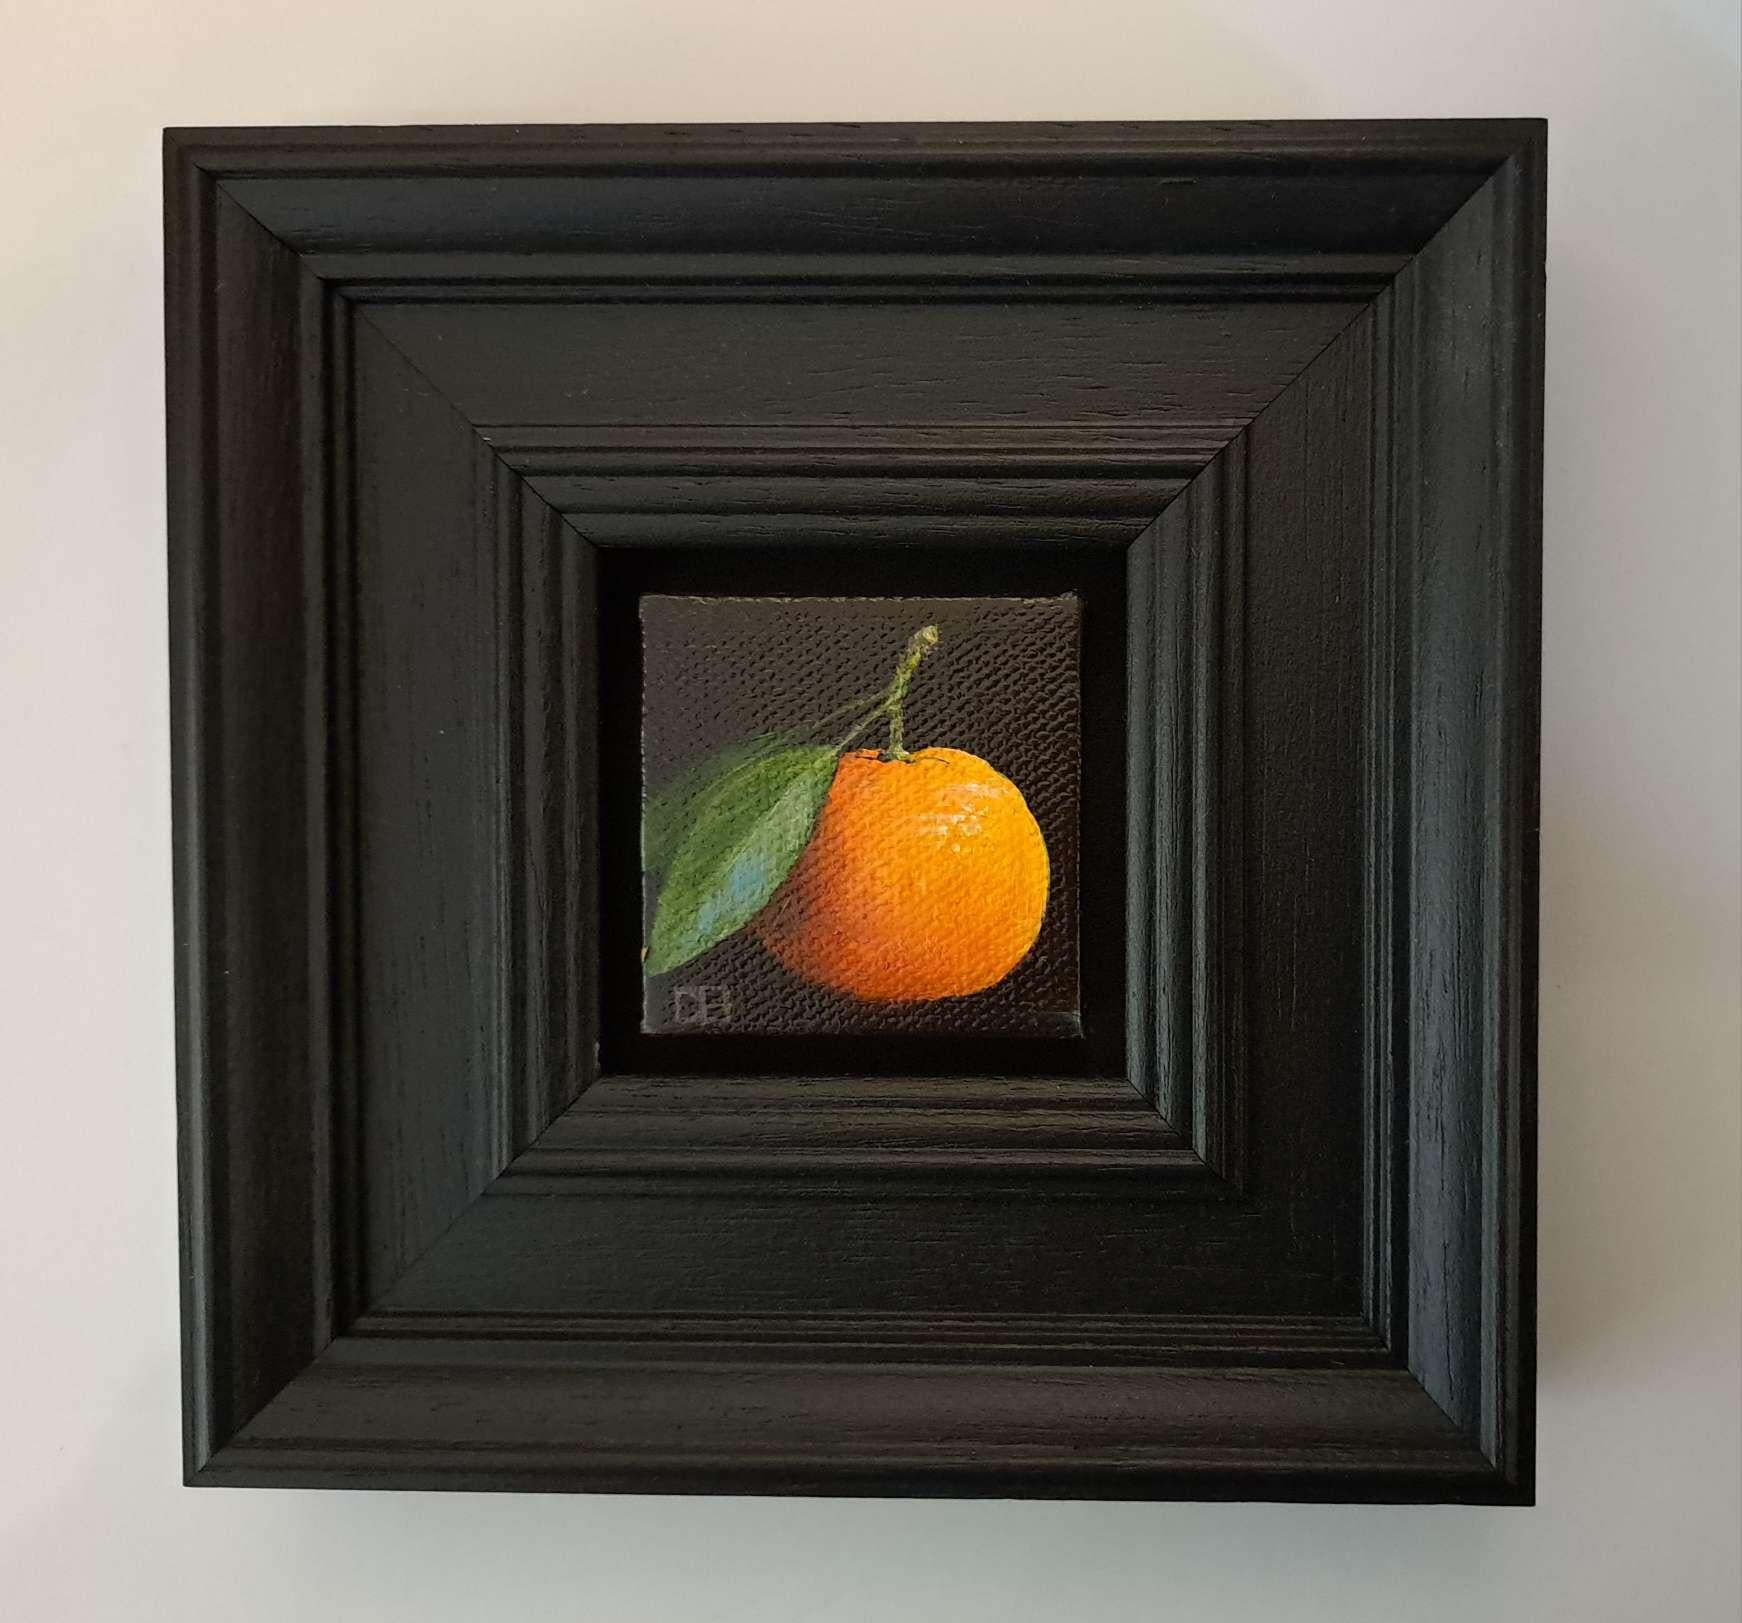 PocketBright Clementine is an original oil painting by Dani Humberstone as part of her Pocket Painting series featuring small scale oil realistic oil paintings with a nod to baroque still life. The paintings are set in a black wood layered